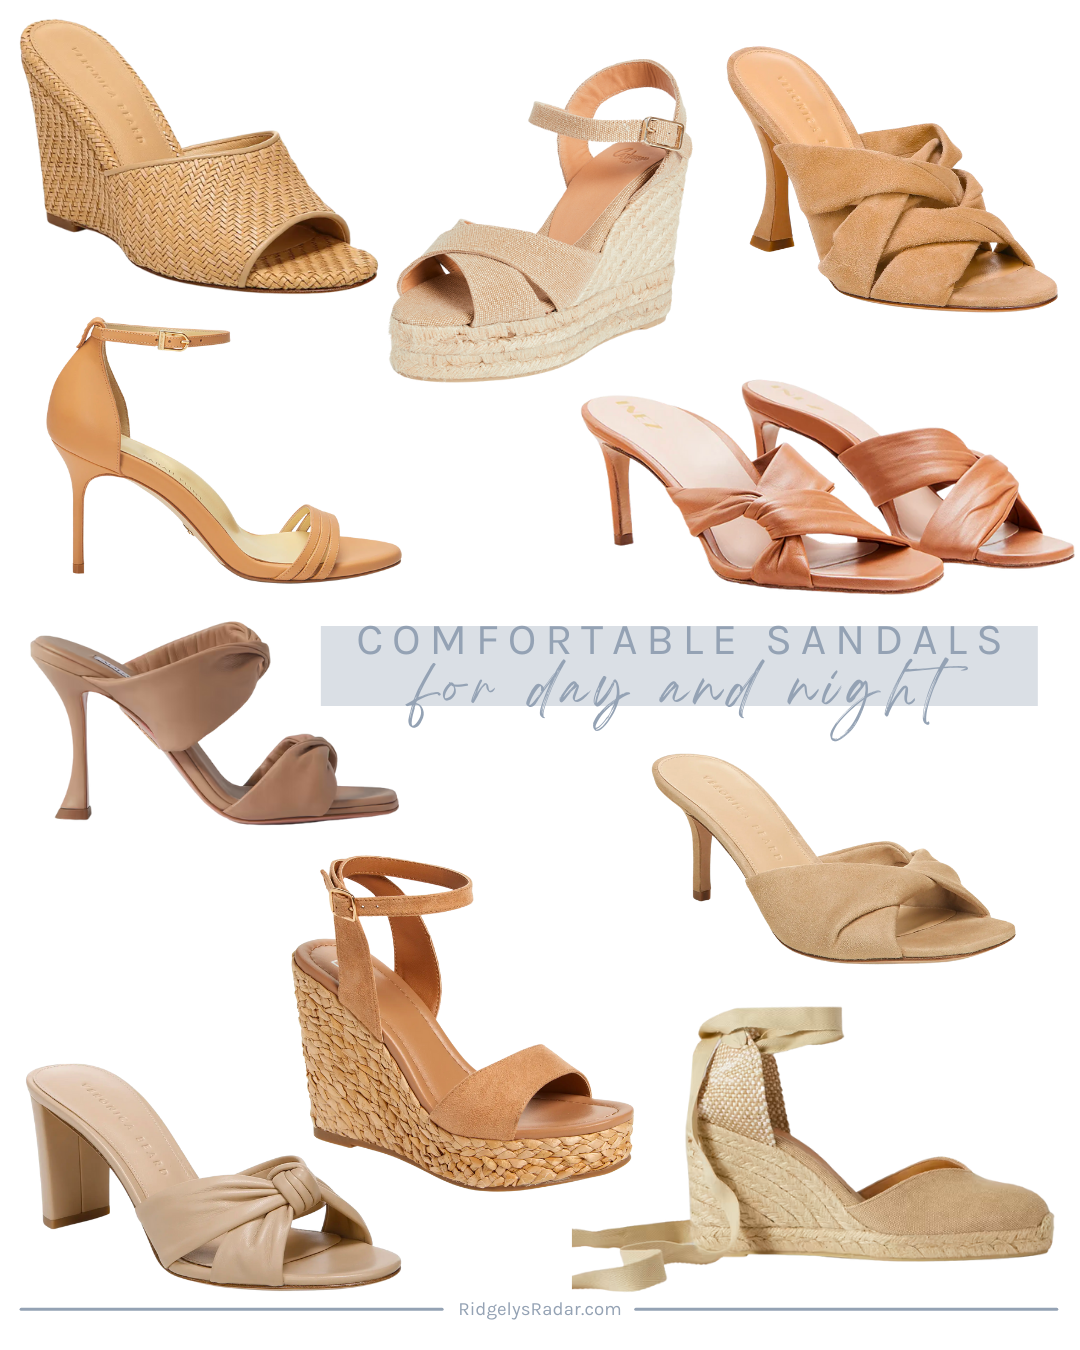 No more sore feet! I am rounding up all the comfortable neutral sandals that will go with everything you own that work for day and night! 